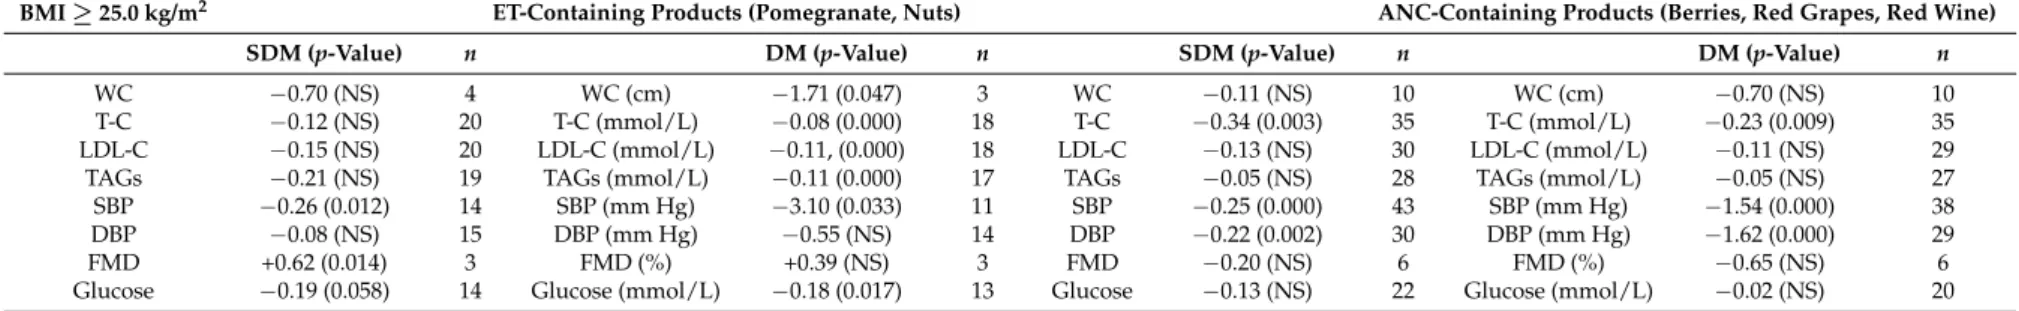 Table 3. Summary of the most significant effects of the foods and food products containing ETs (pomegranate and nuts) and those containing ANCs (berries, red grapes and red wine) on biomarkers of cardiometabolic risk in overweight and (or) obese individual